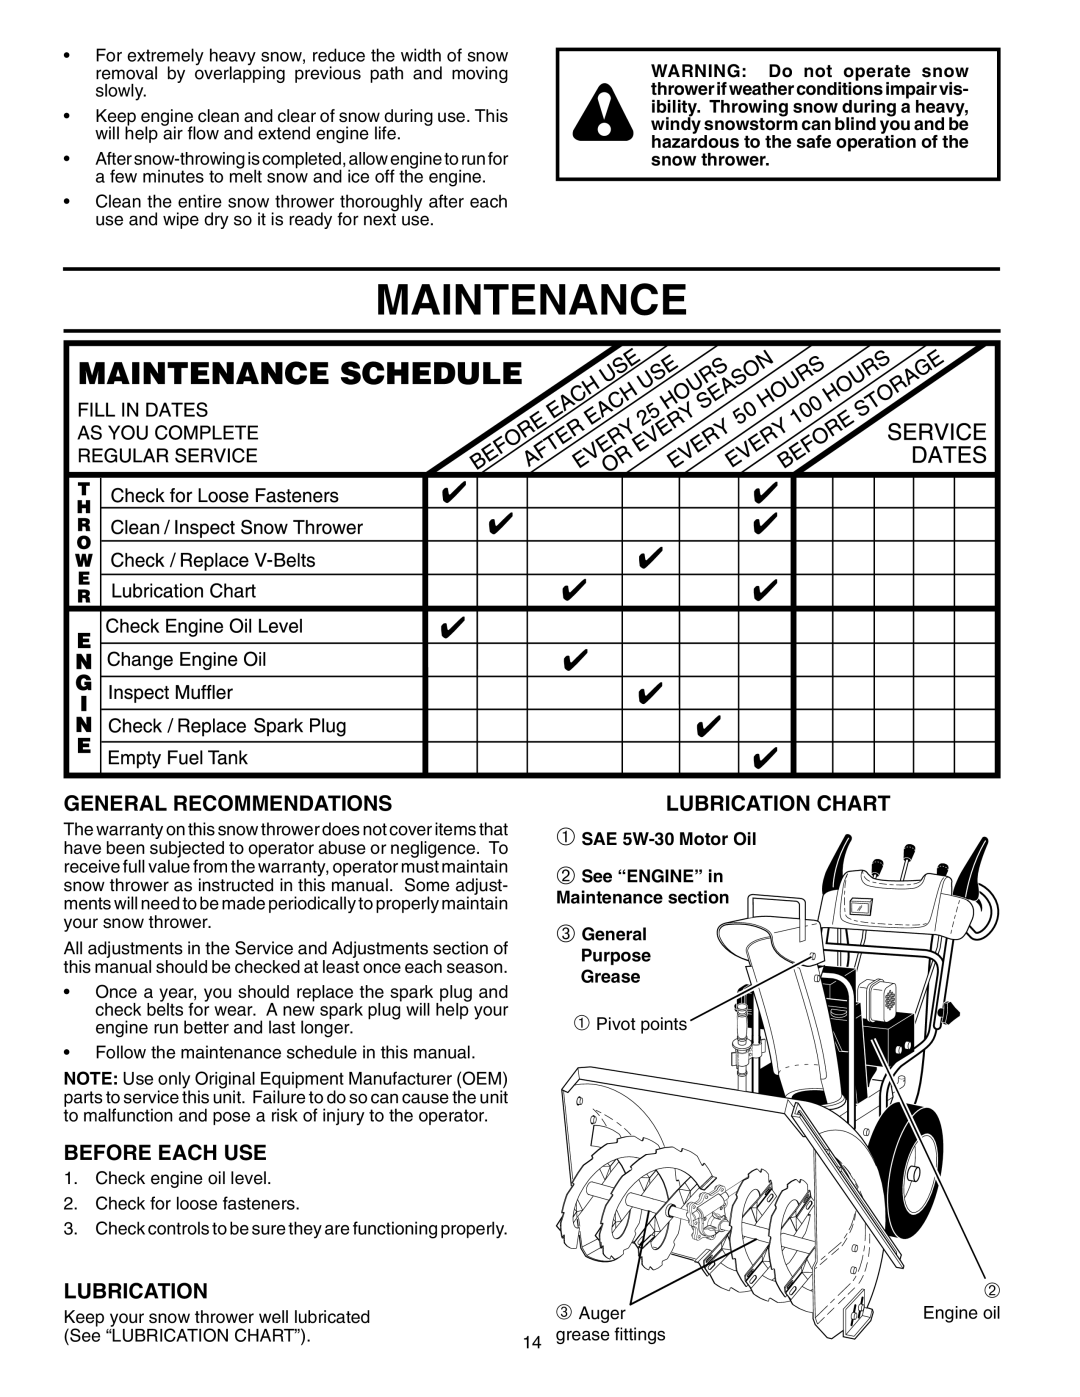 Husqvarna 1130SBE-OV Maintenance, General Recommendations, Before Each Use, Lubrication Chart, ➀SAE 5W-30Motor Oil 